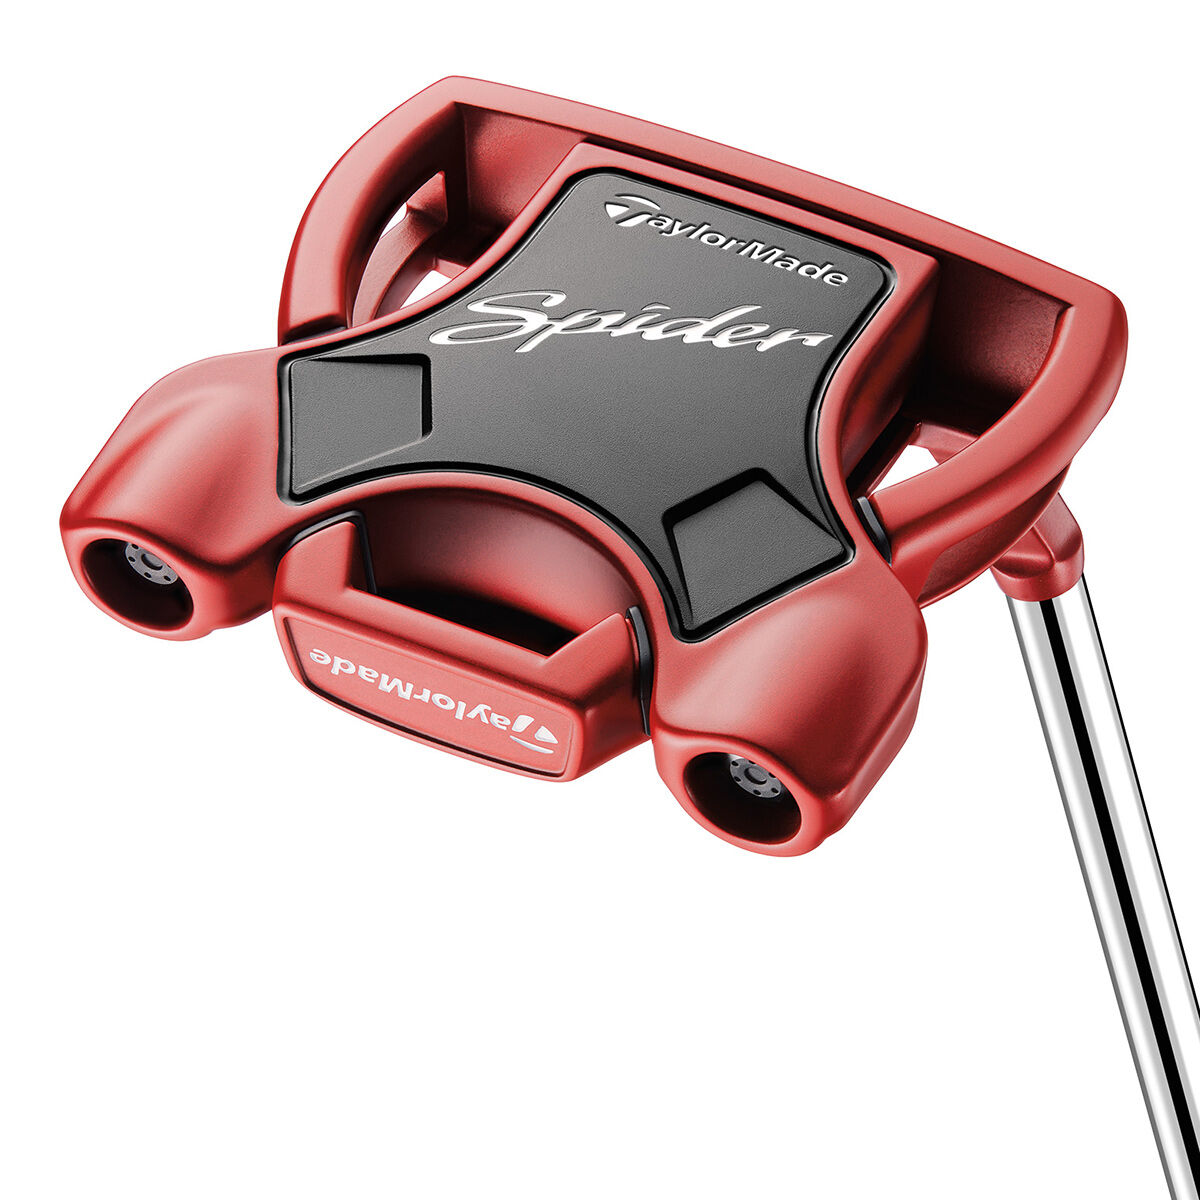 TaylorMade Spider Tour Red # 3 Golf Putter, Mens, Right hand, 35 inches | American Golf von TaylorMade